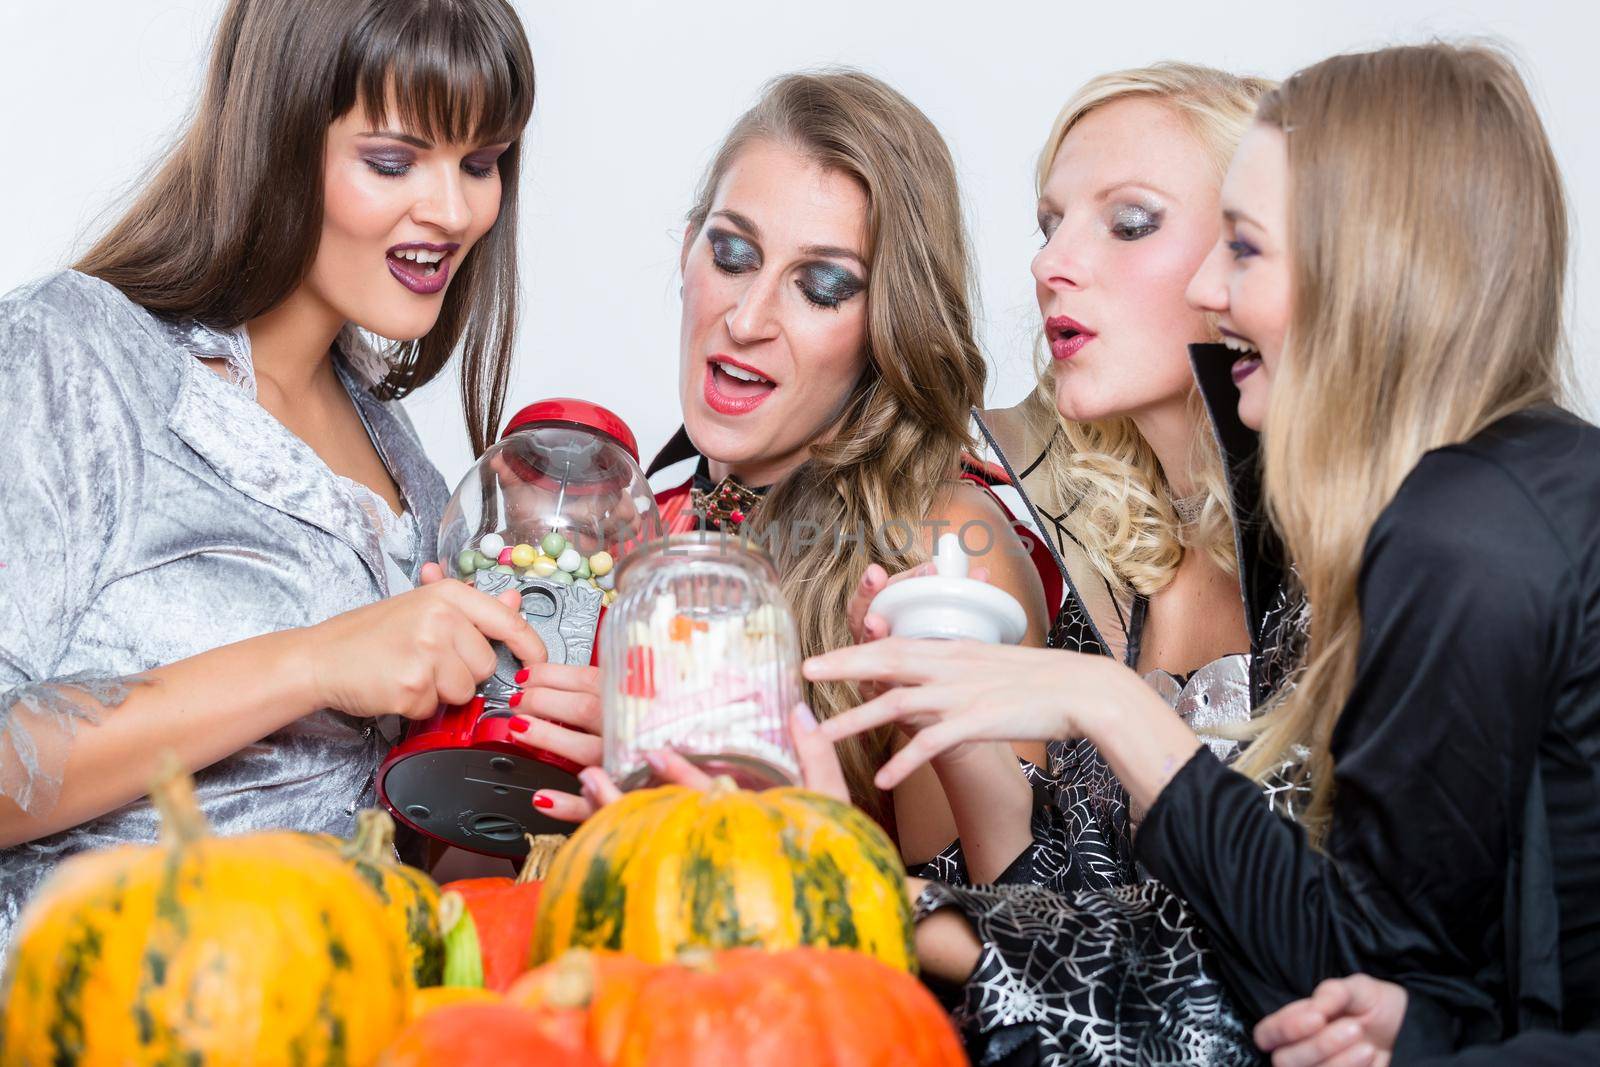 Funny young women and best friends sharing various delicious candies while celebrating Halloween together at costume party indoors